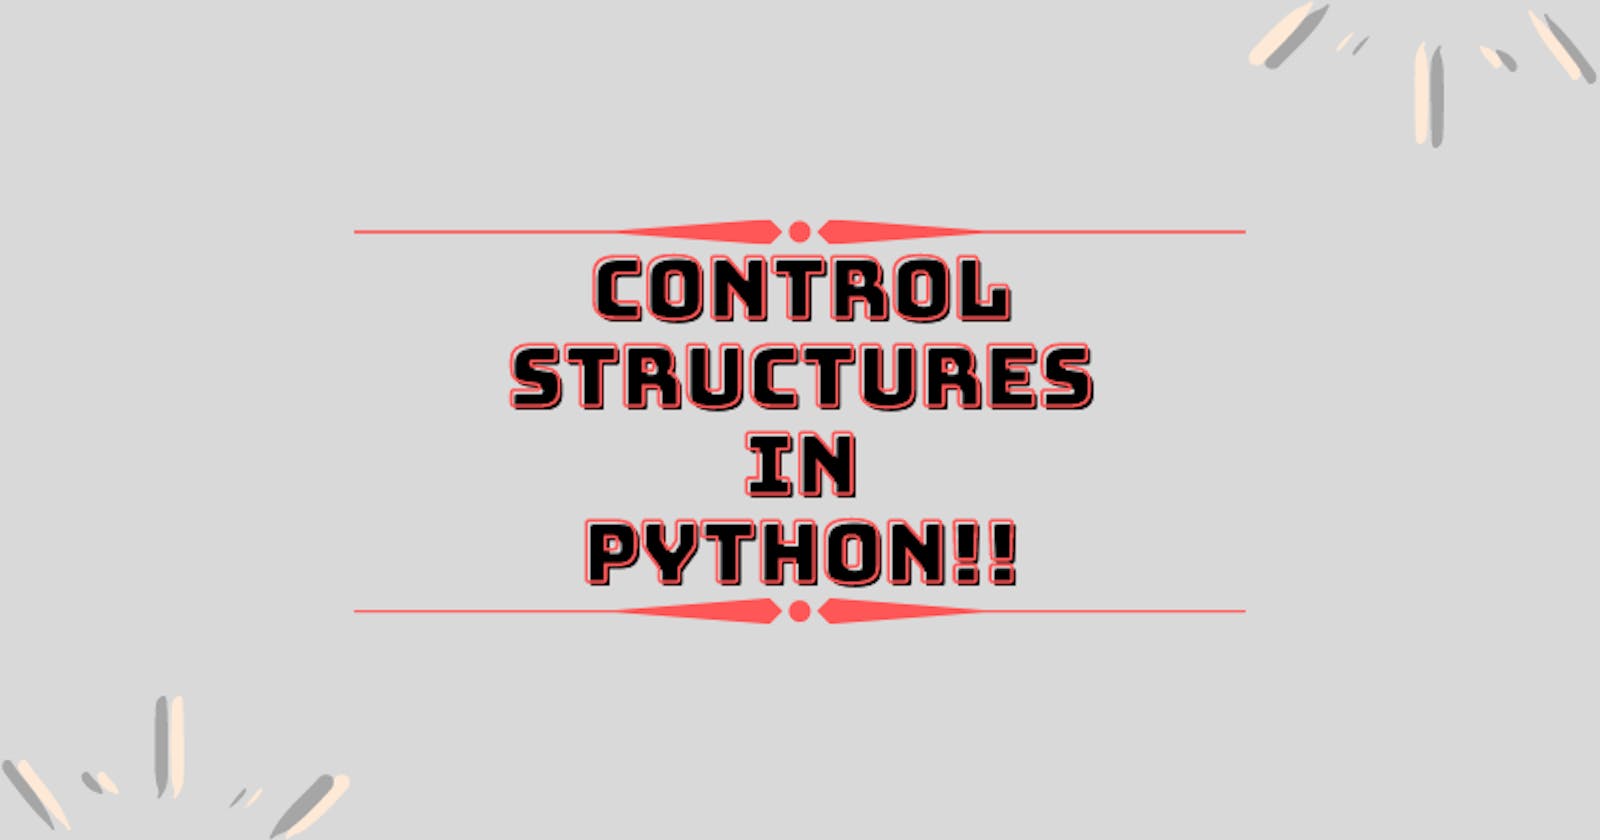 Control structures in python